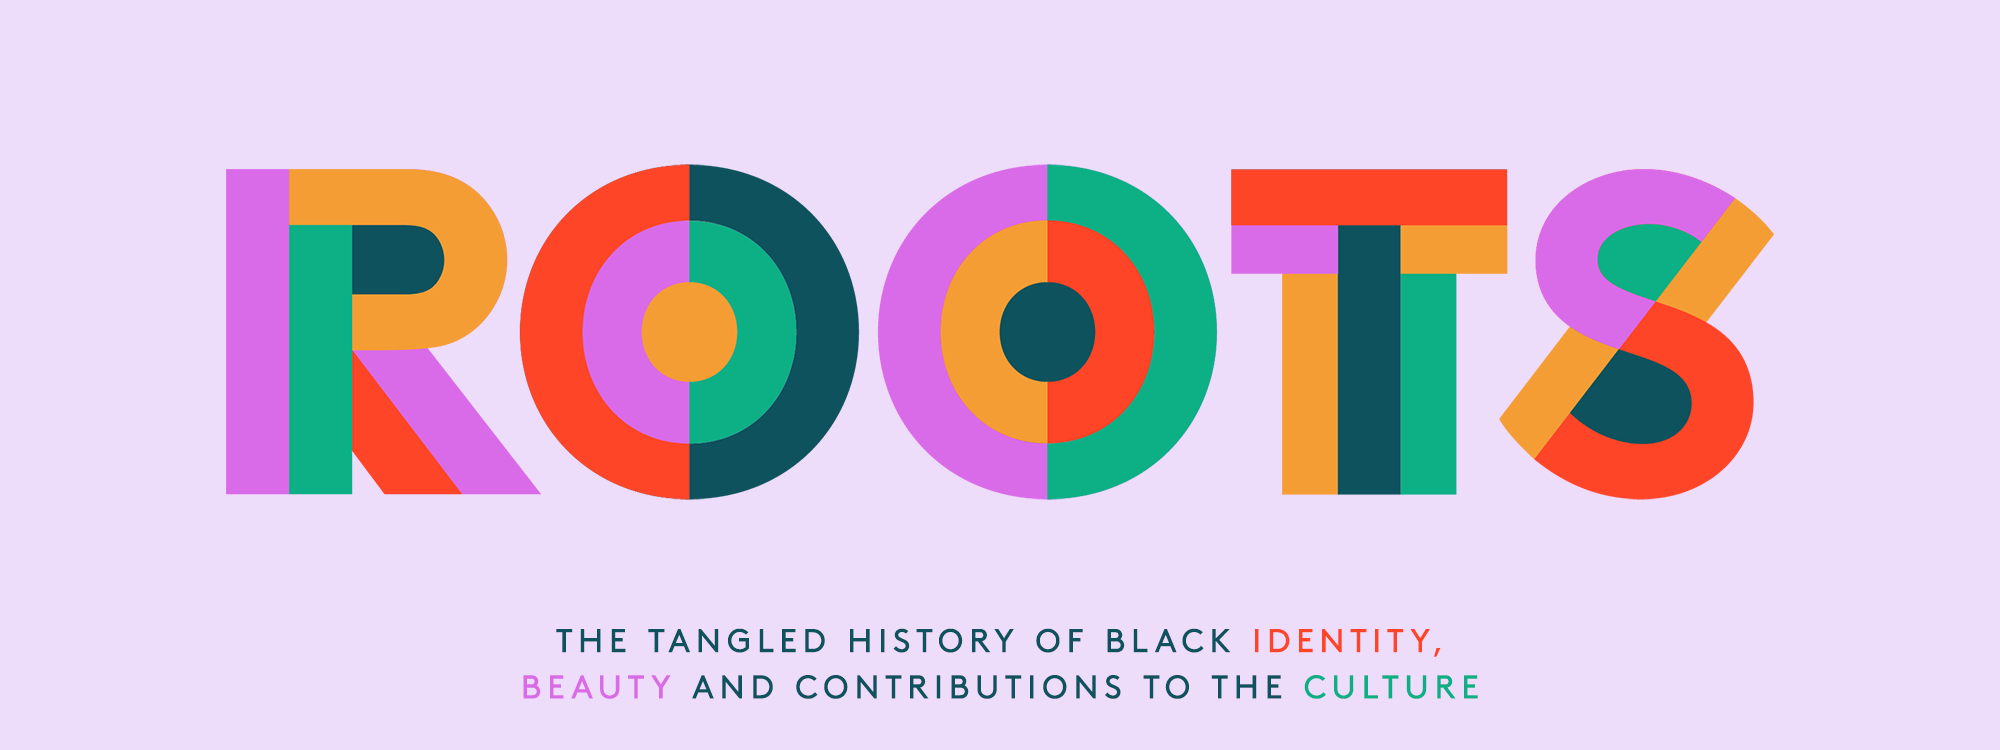 The tangled history of Black identity, beauty and contributions to the culture.